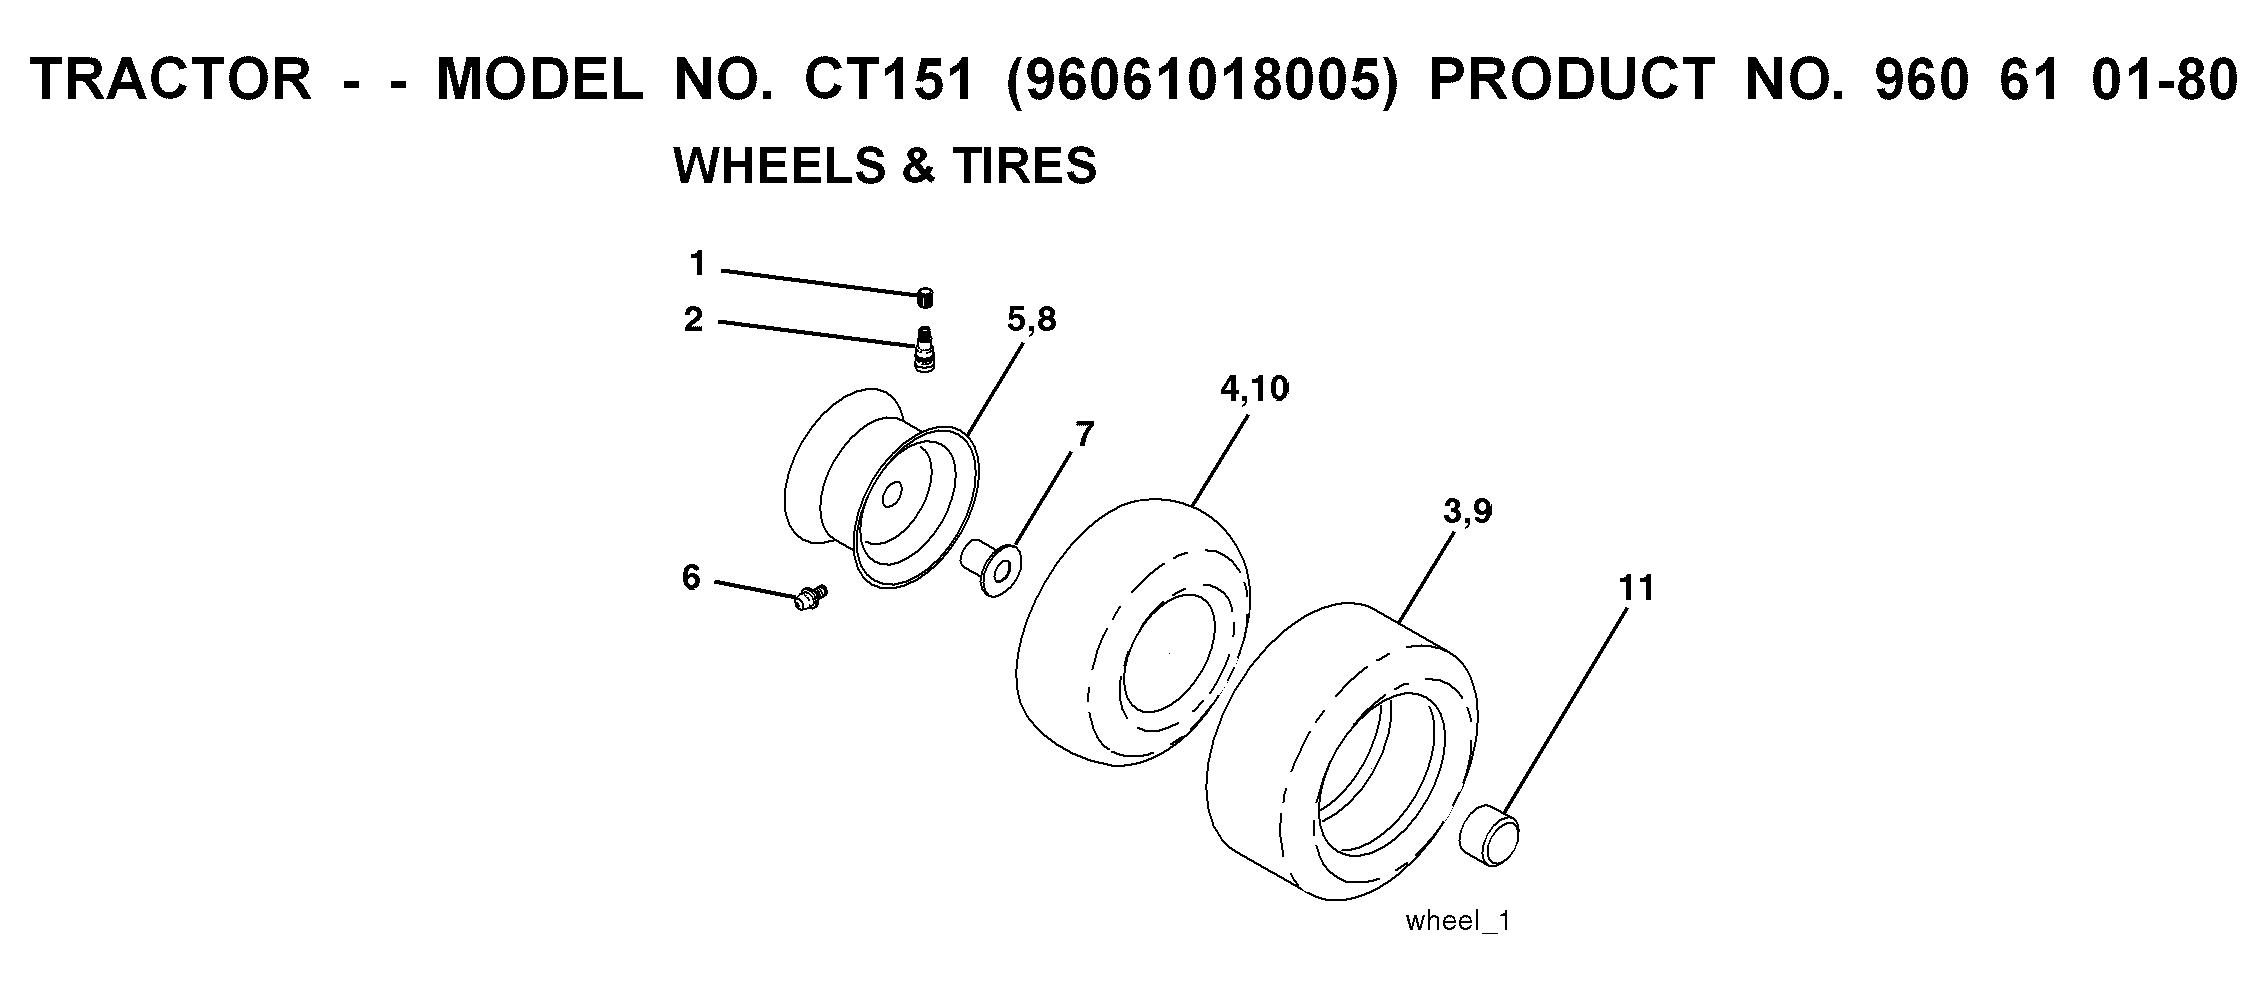 Wheels and tires 532059192, 532065139, 532122073, 532059904, 532106732, 532000278, 532009040, 532106108, 532420531, 532420531, 532007152, 532104757, 576707201